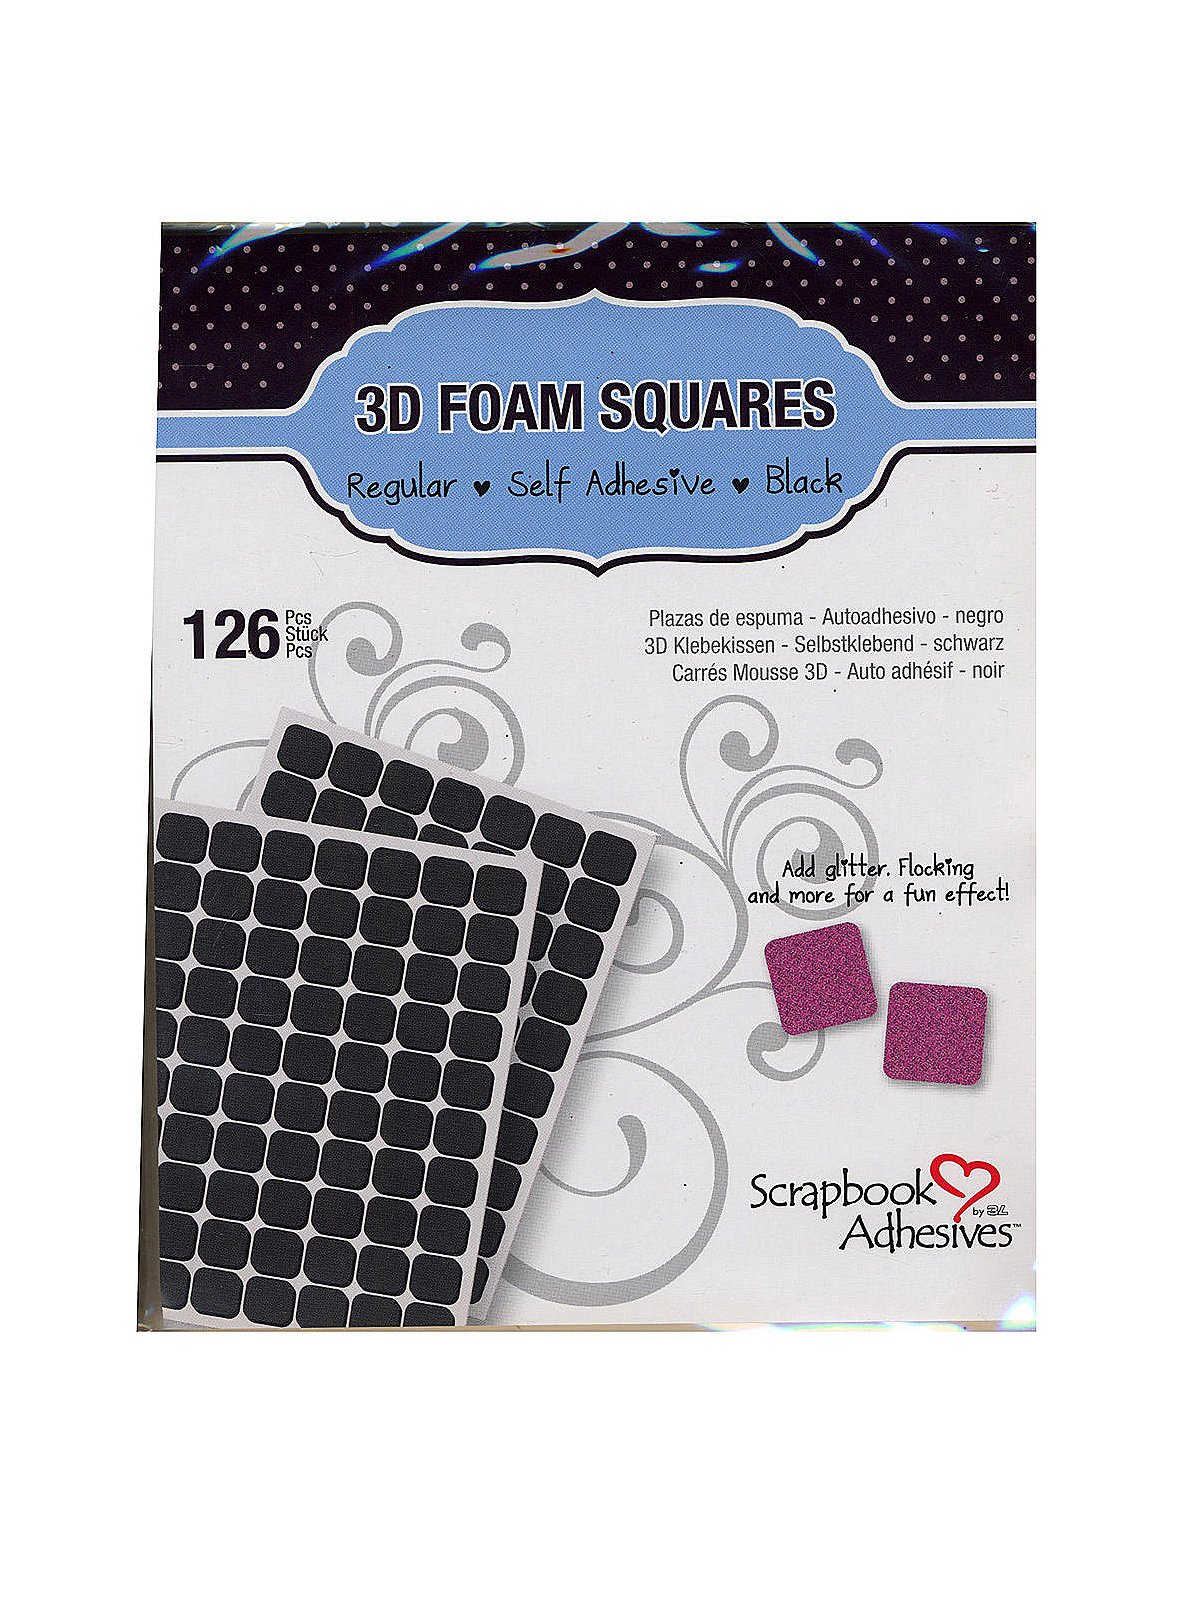 3D Foam Squares White Regular Size - Scrapbook Adhesives by 3L